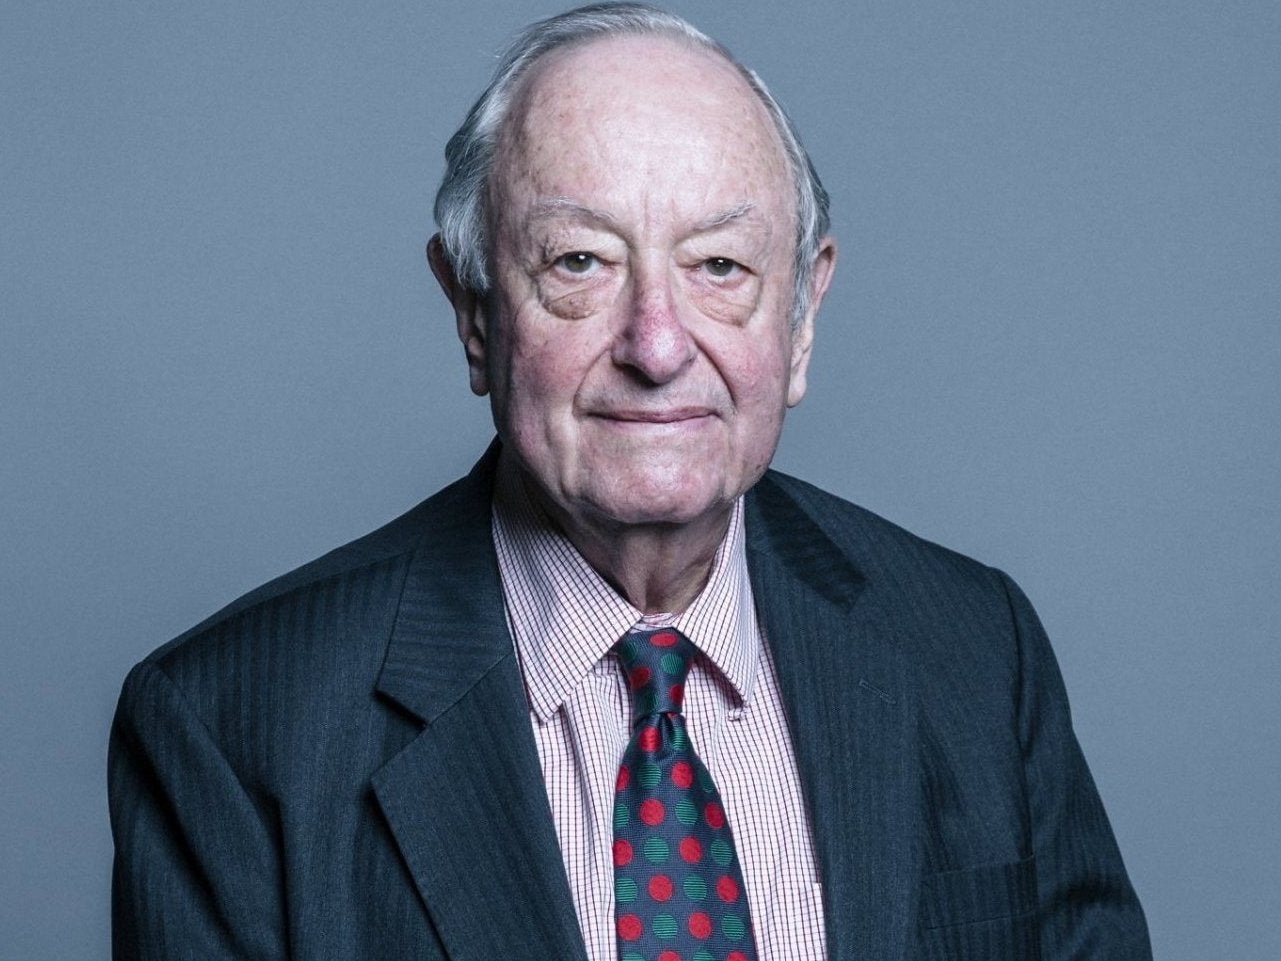 Lord Lester faces suspension from House of Lords for nearly four years over sexual harassment claim